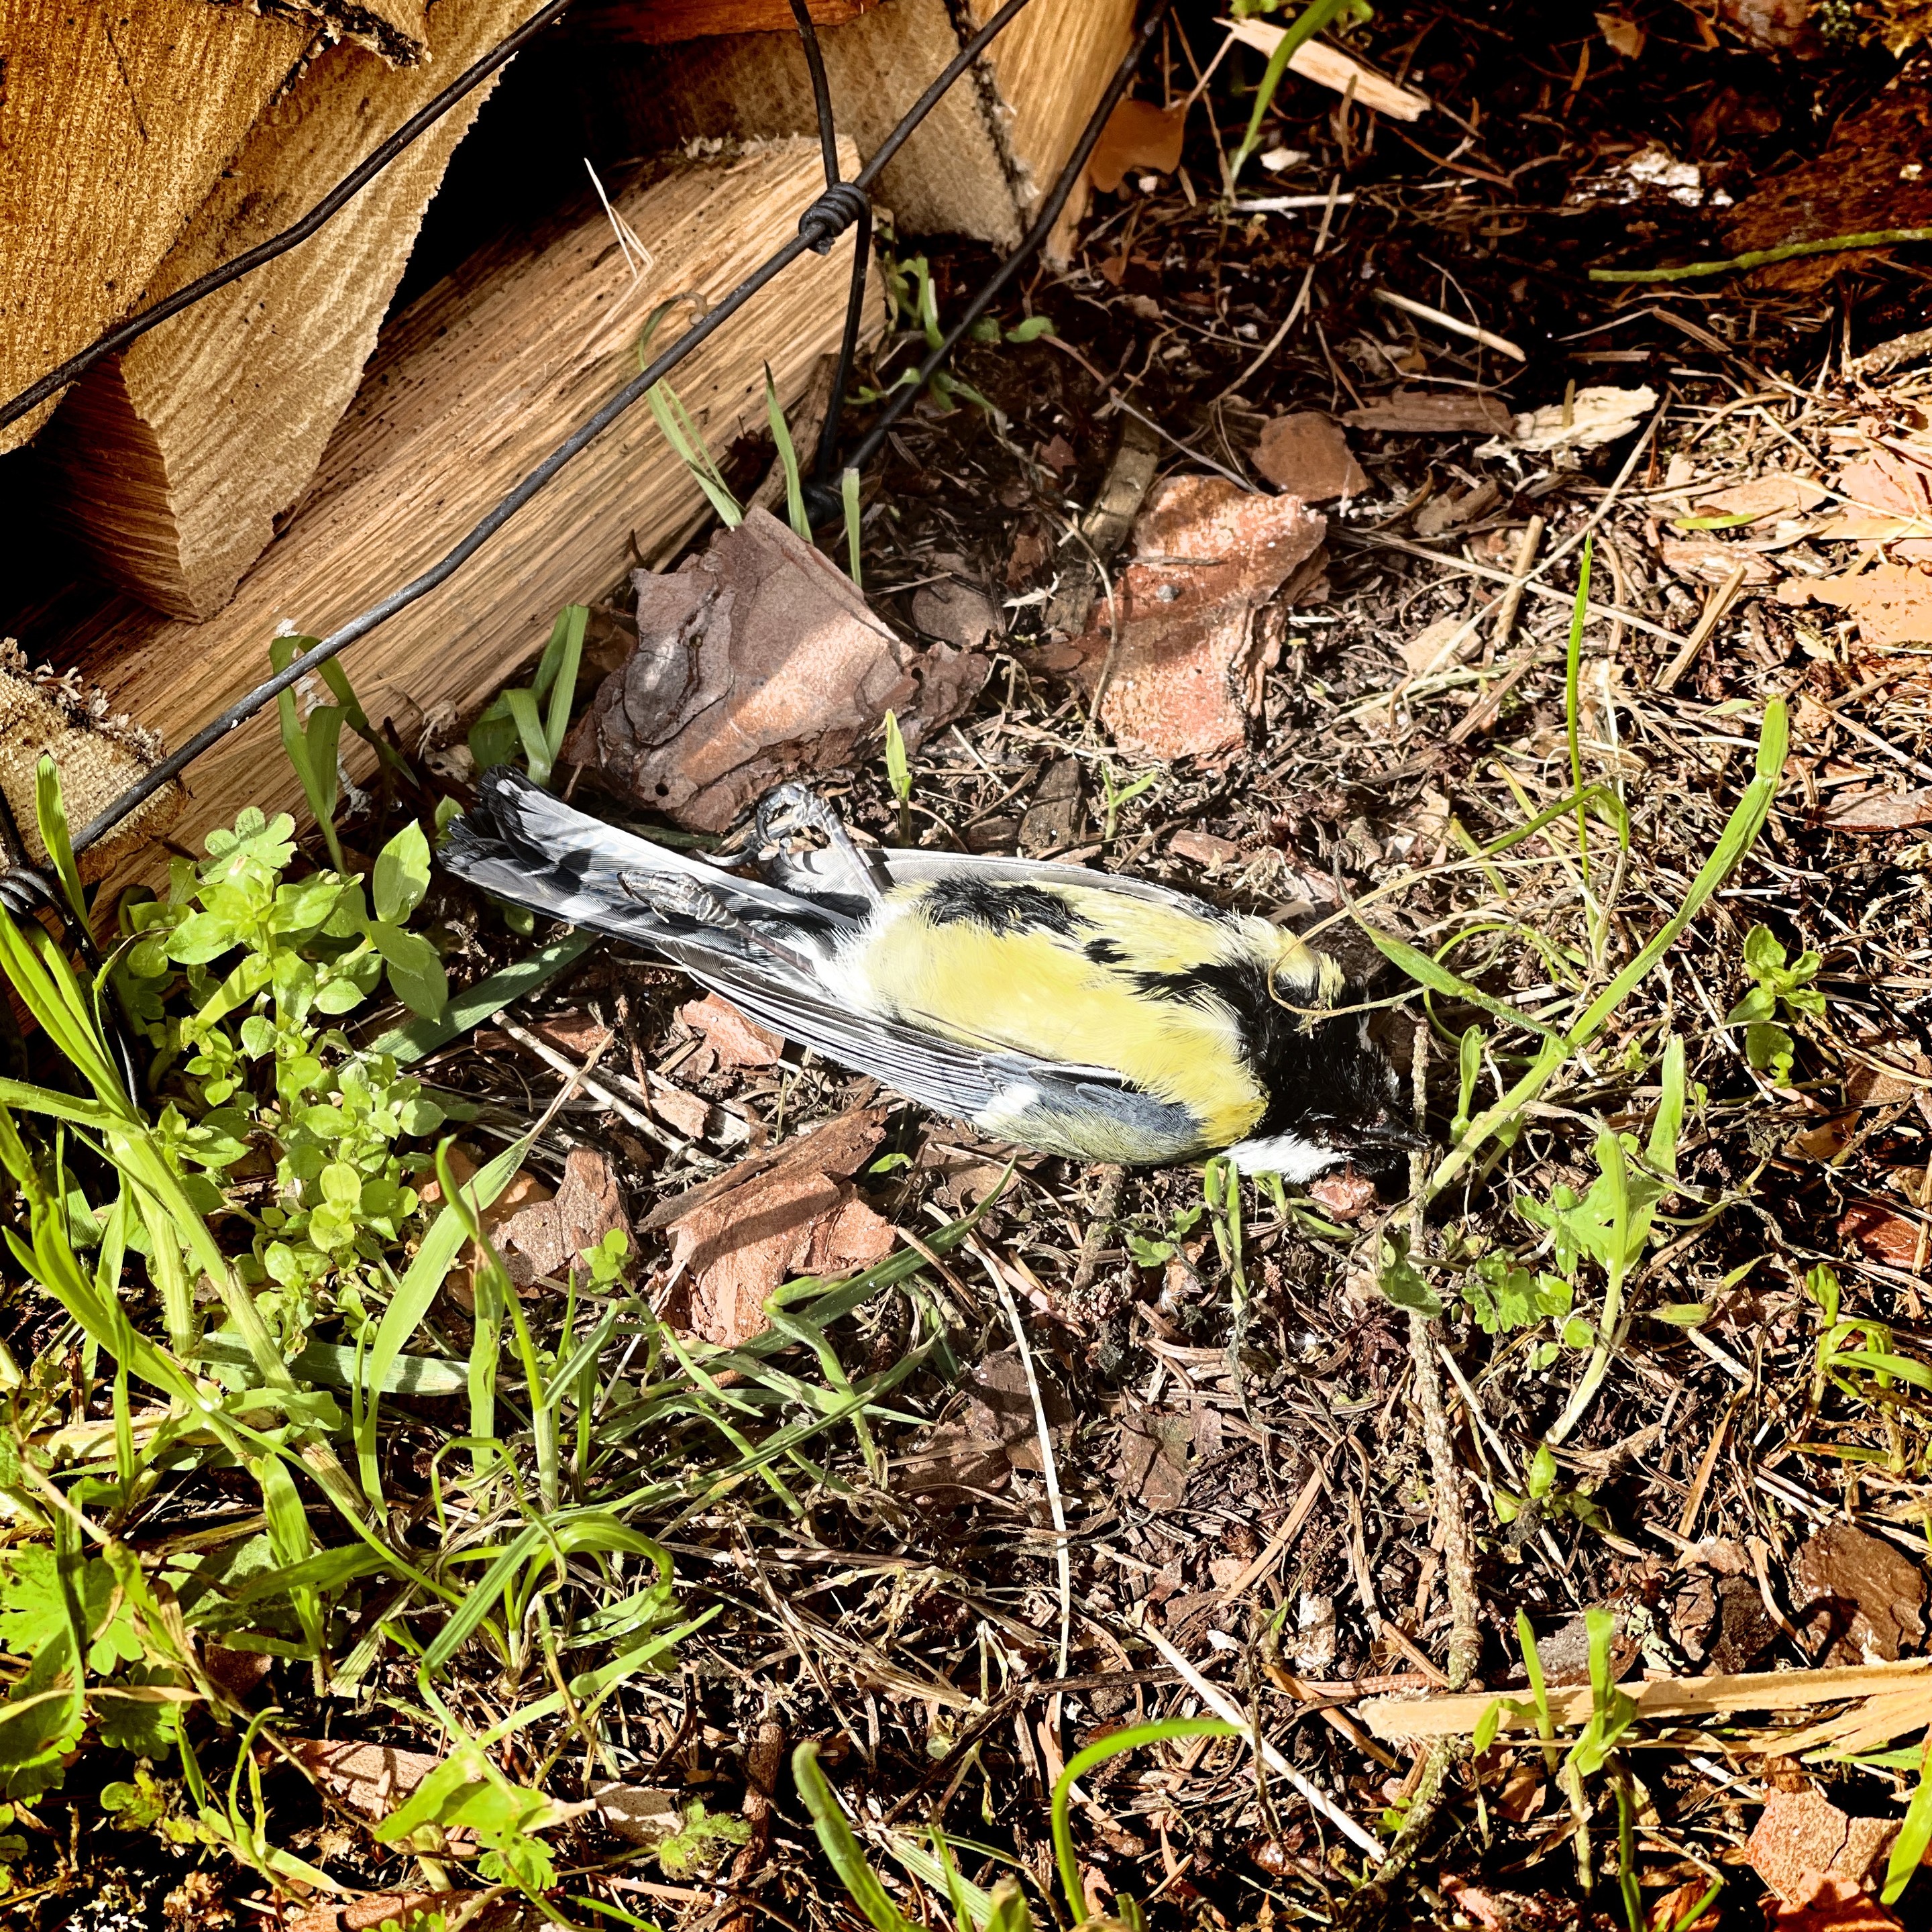 A deceased bird lying on the ground among leaves and twigs.